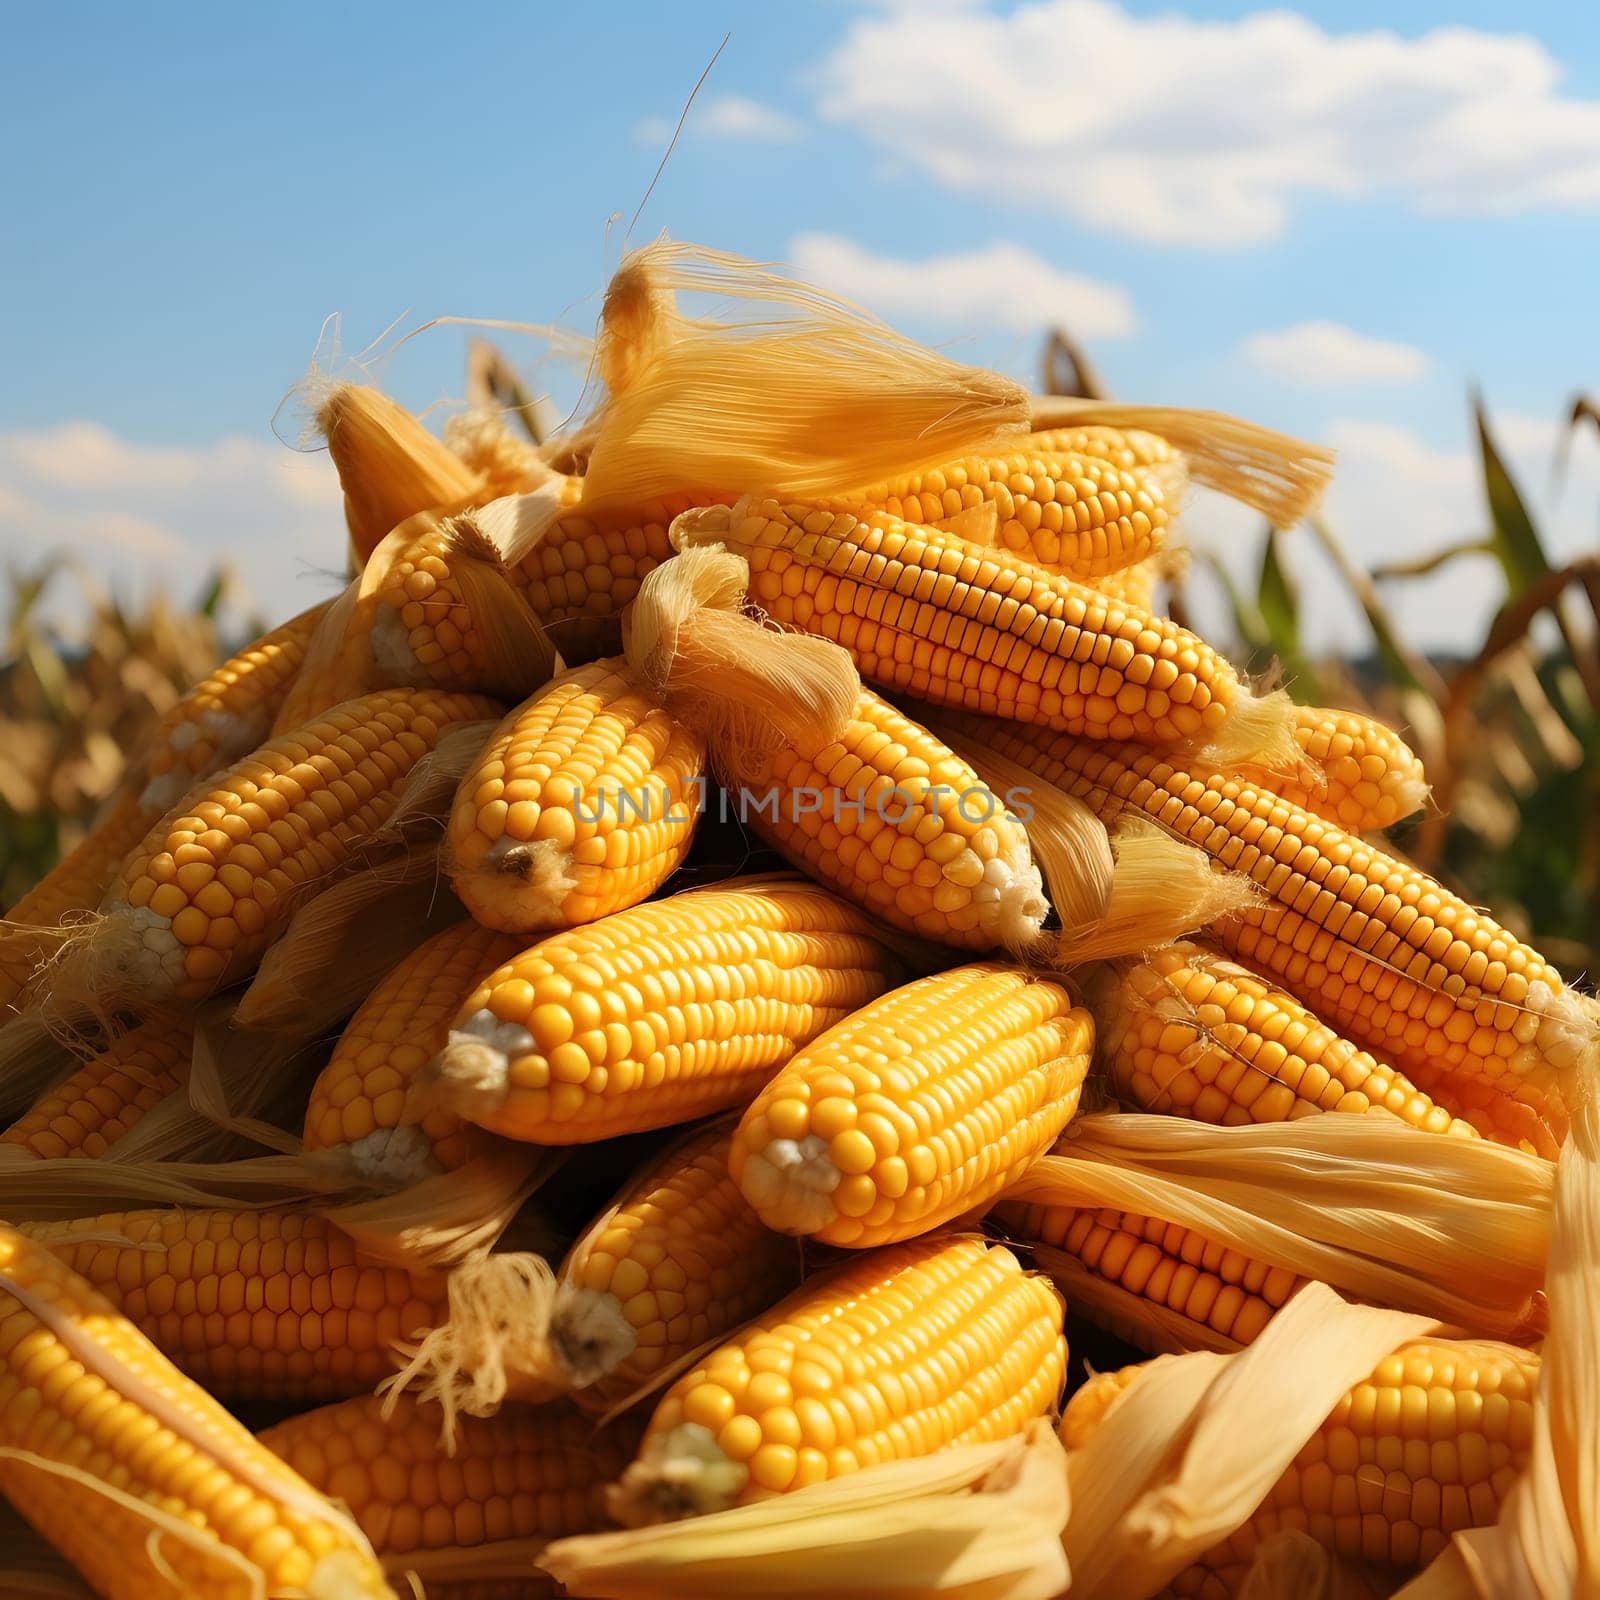 A pile of yellow corn cobs in a field. Autumn harvest. Corn as a dish of thanksgiving for the harvest. An atmosphere of joy and celebration.